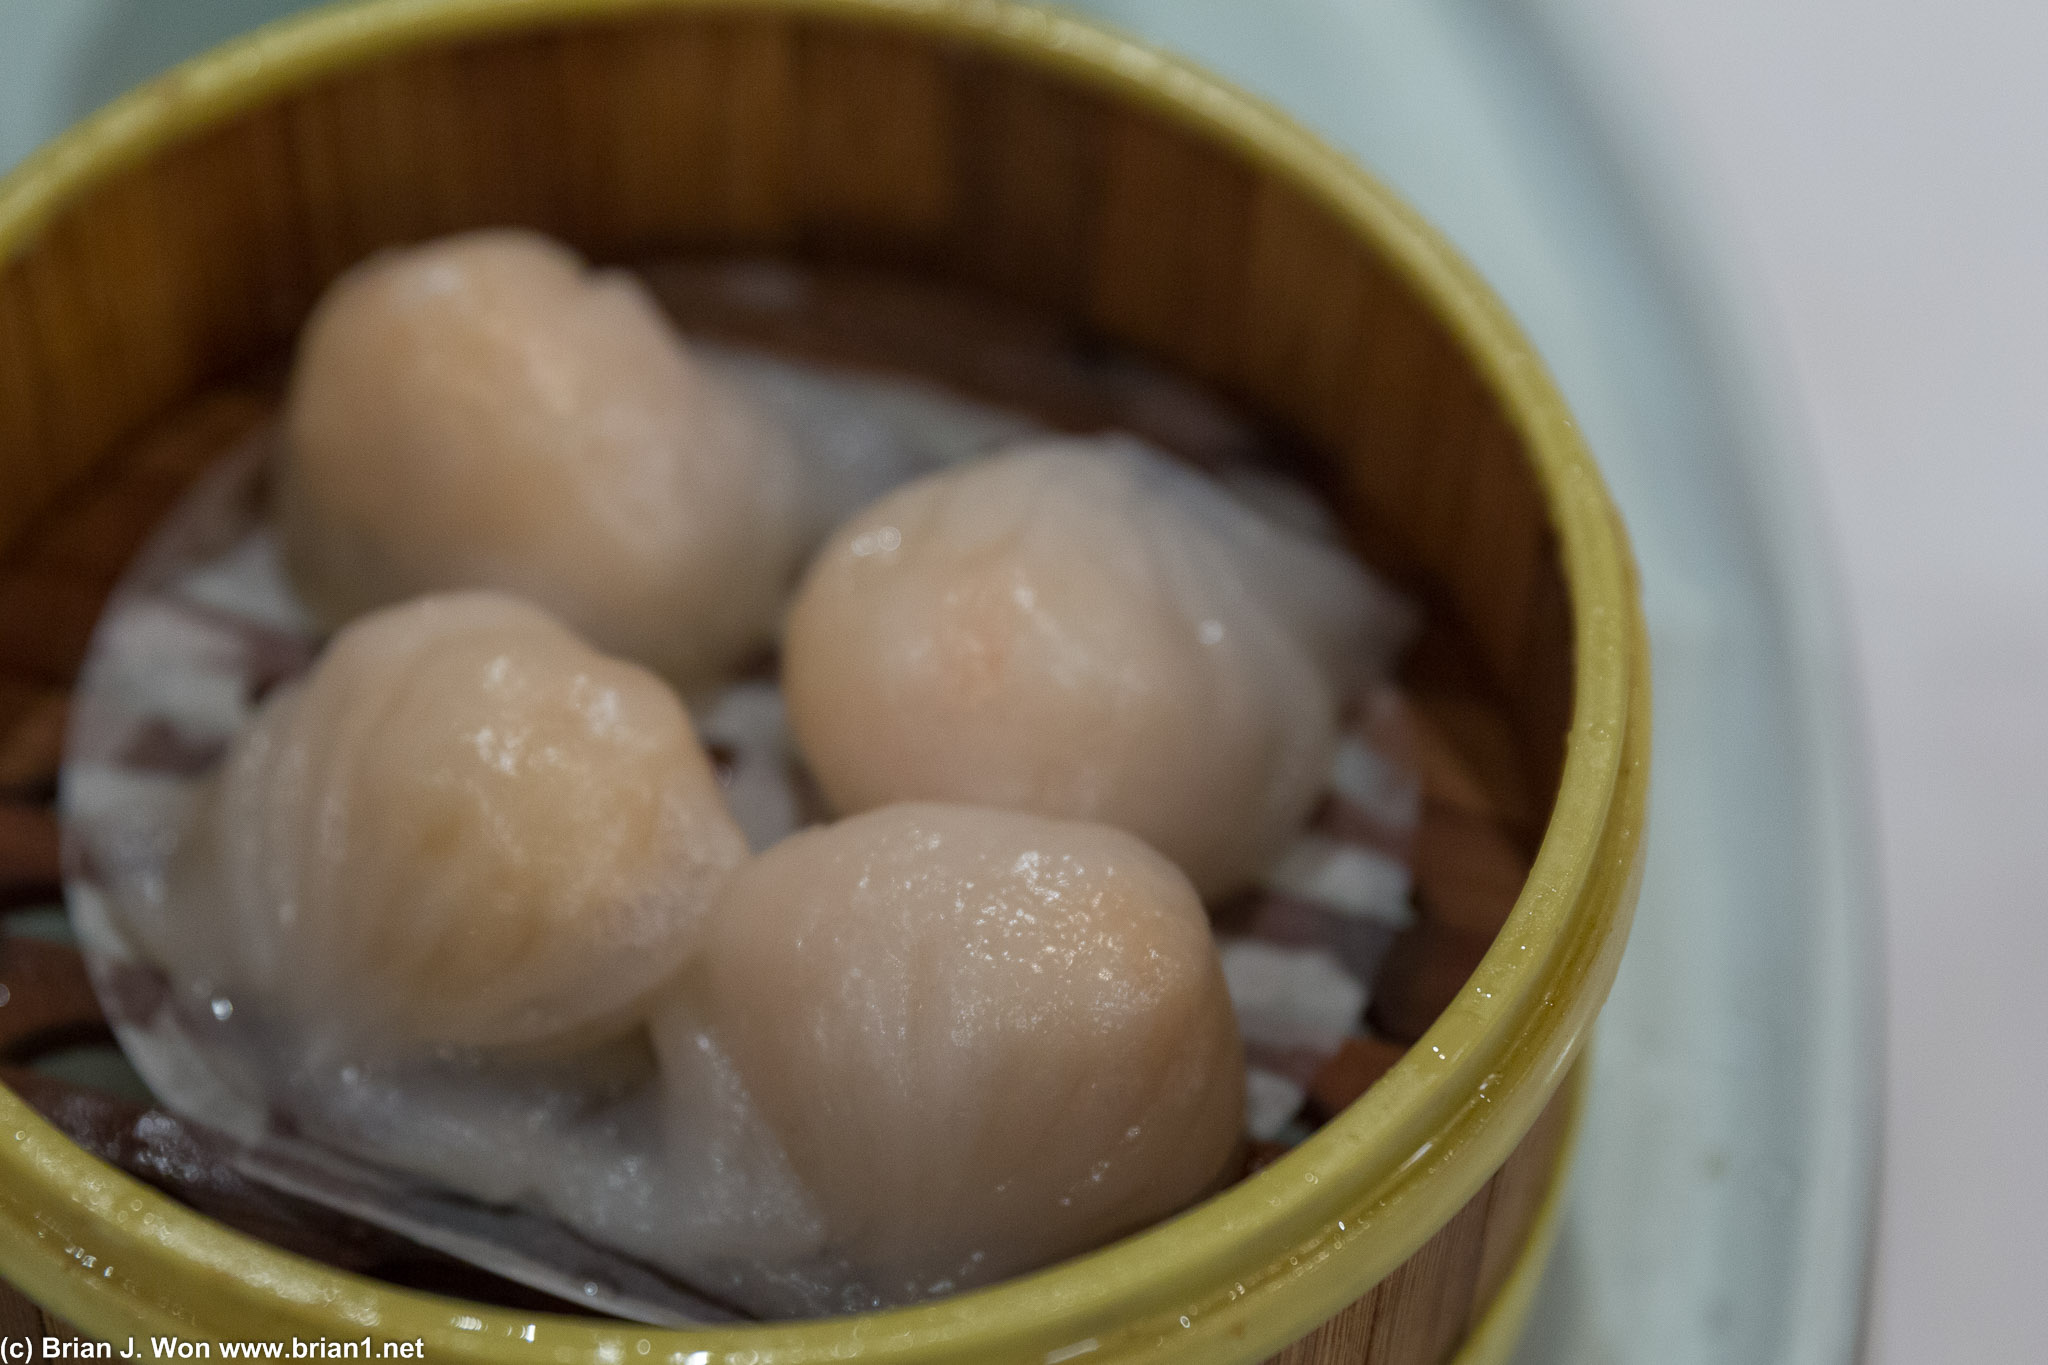 Har gow. Folds not quite distinct enough and skin not quite clear enough, but taste wasn't bad.